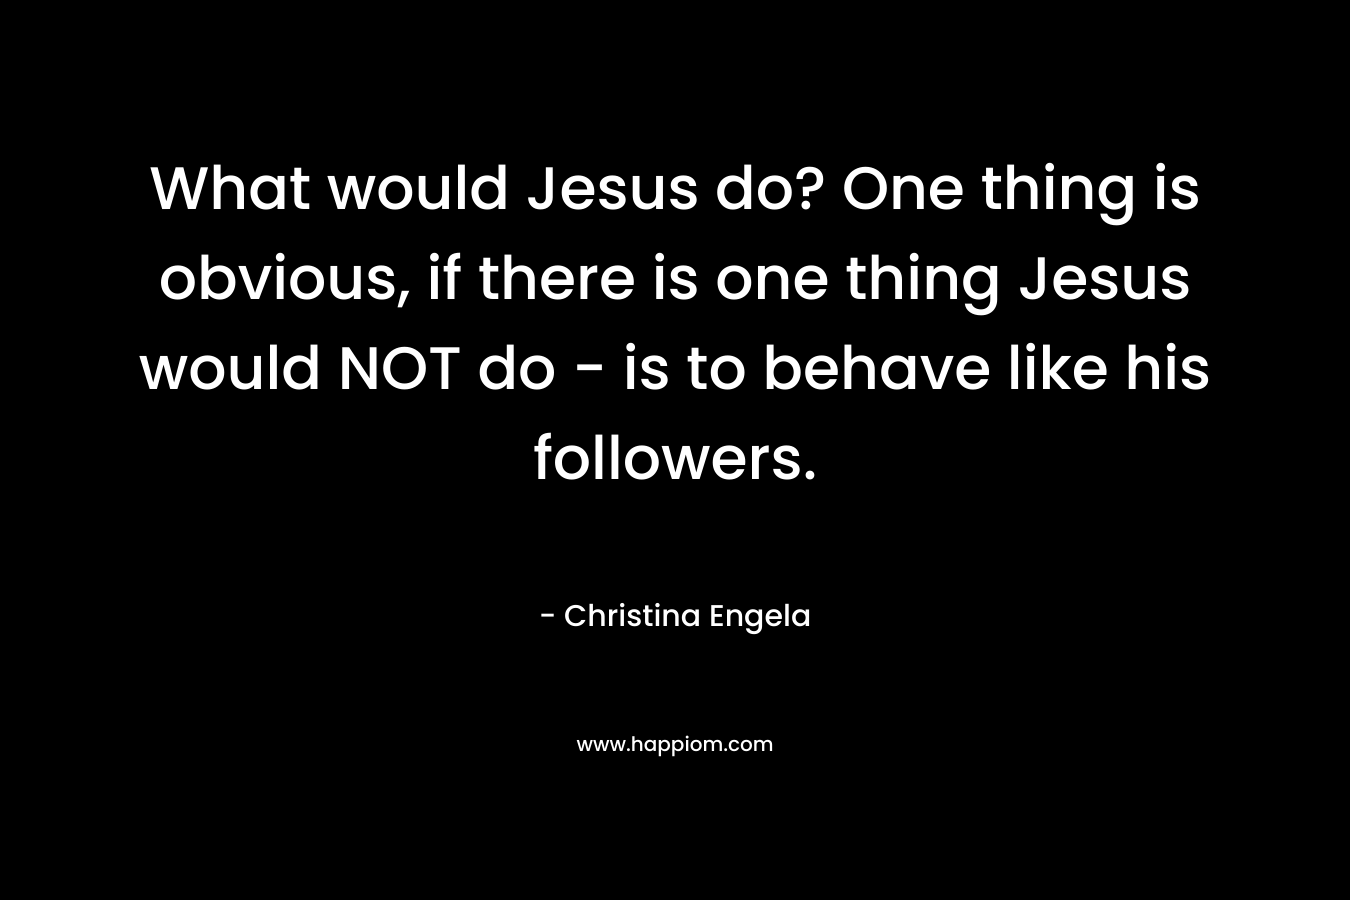 What would Jesus do? One thing is obvious, if there is one thing Jesus would NOT do - is to behave like his followers.